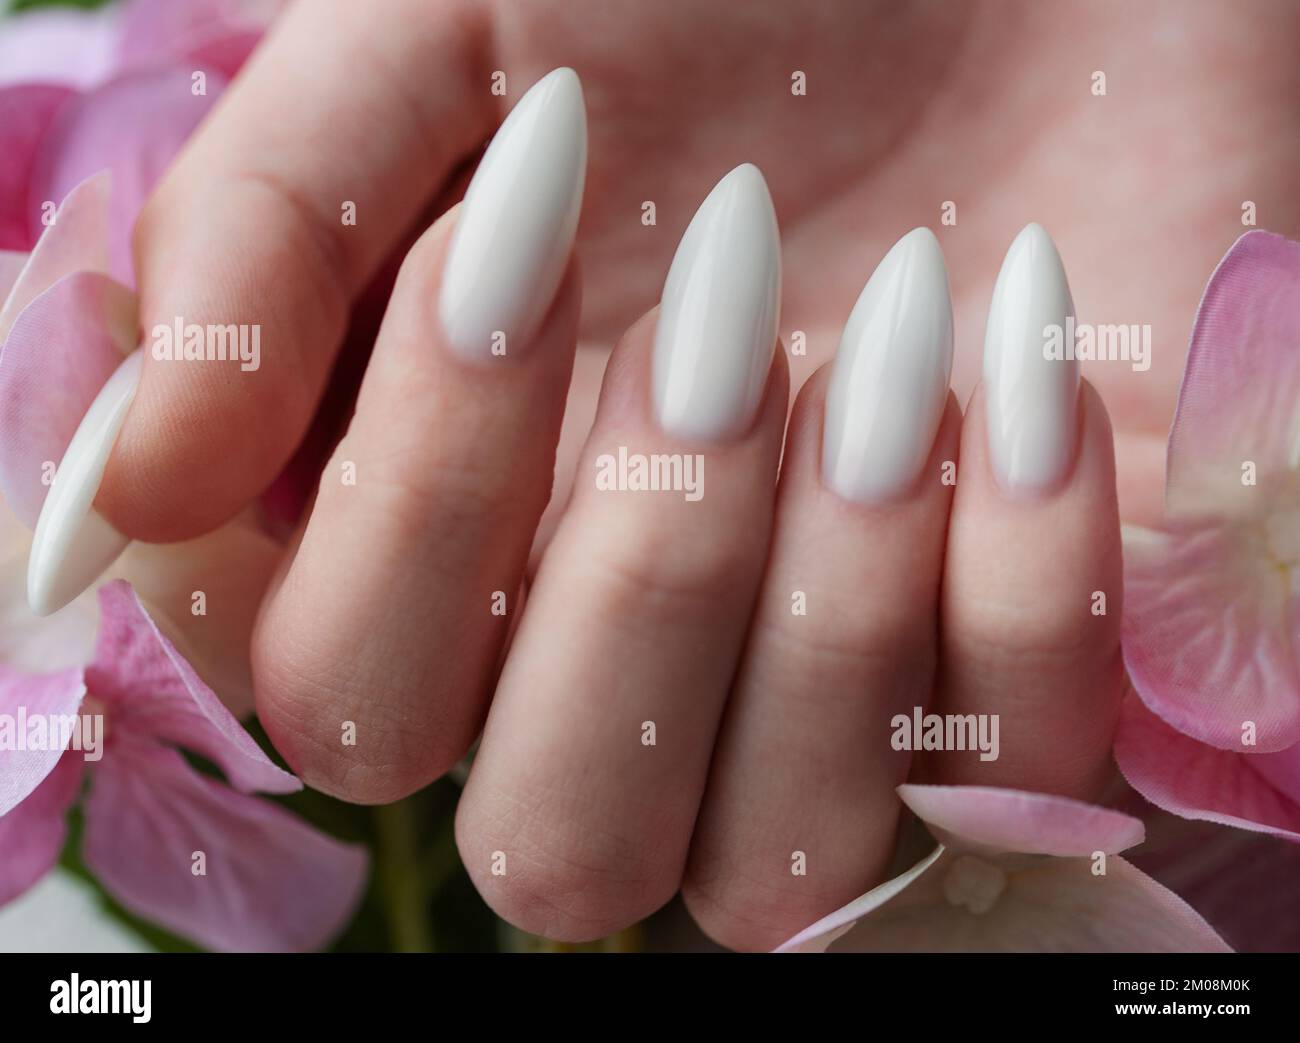 Beautiful hands of a young woman with white manicure on nails. Female hands holding a hydrangea flower Stock Photo